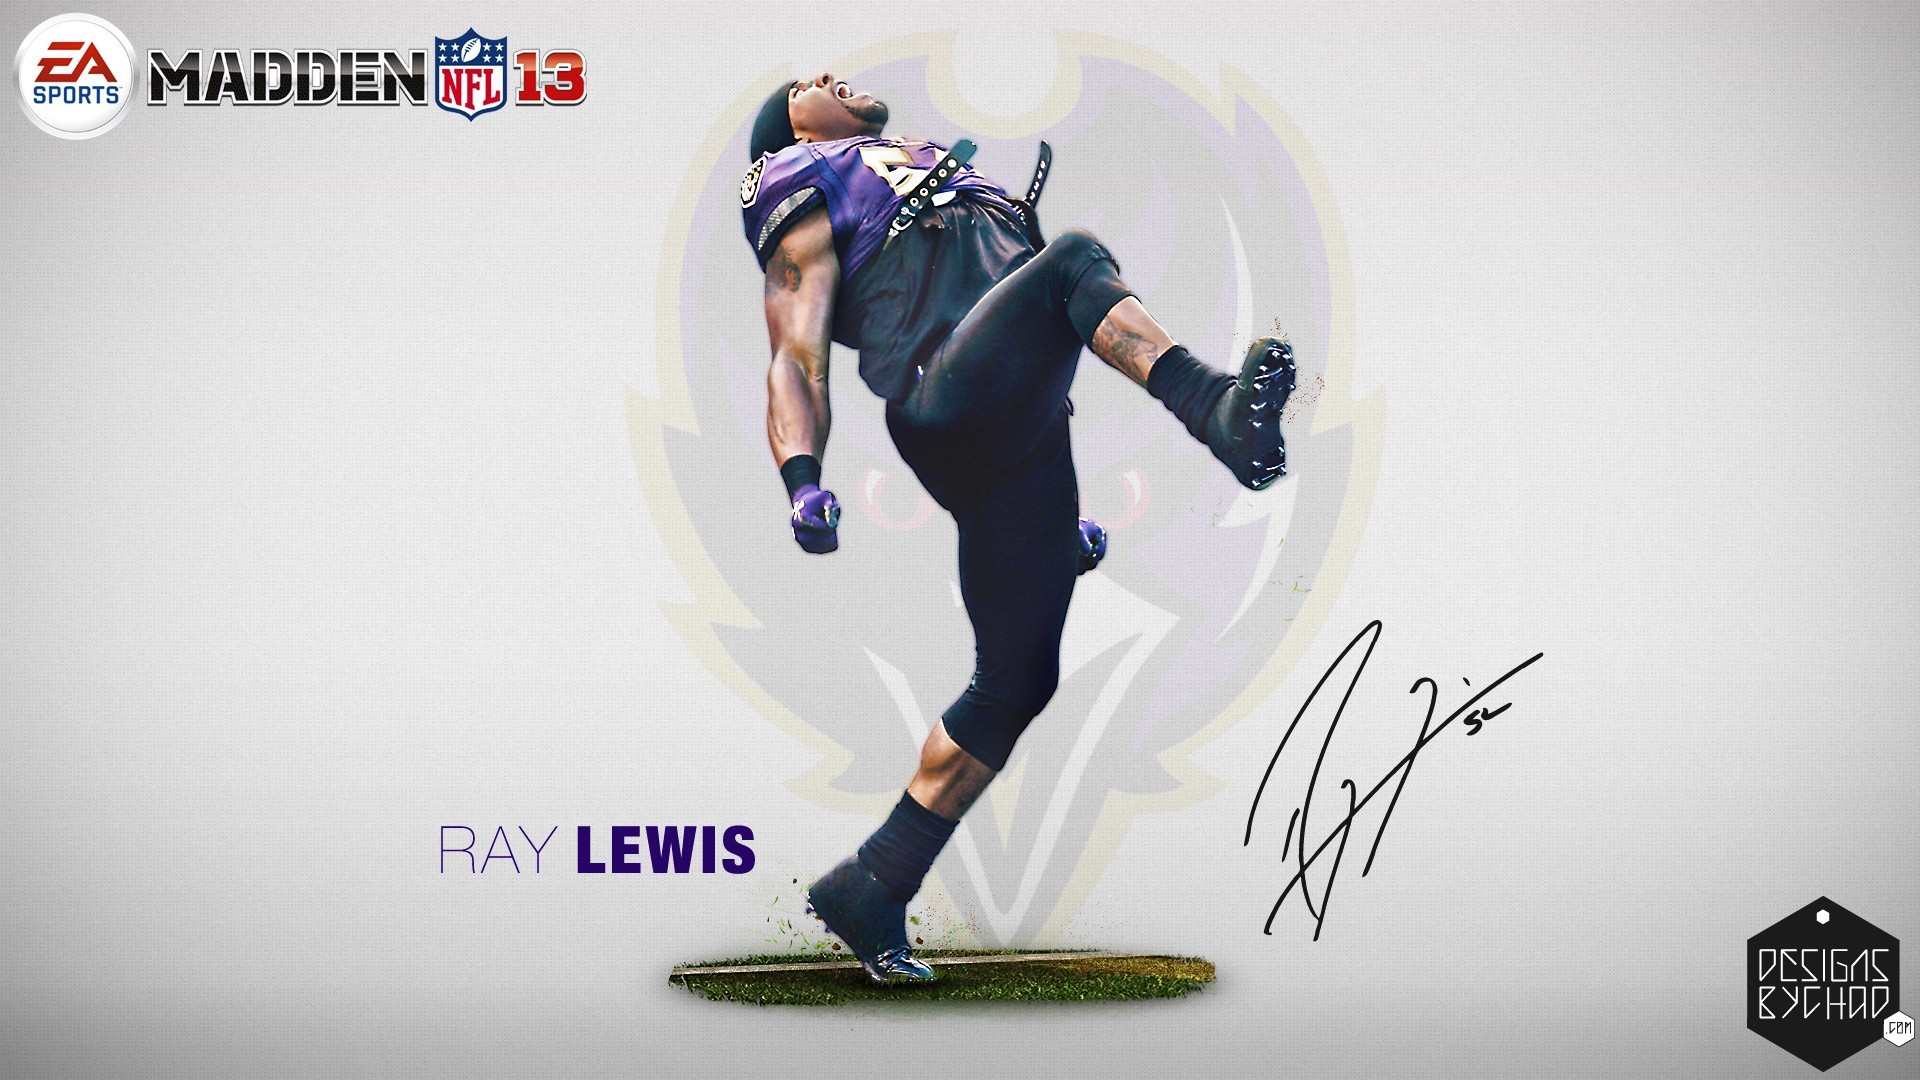 1920x1080 undefined Ray Lewis Wallpapers (43 Wallpapers) | Adorable Wallpapers |  Wallpapers | Pinterest | Ray lewis and Wallpaper